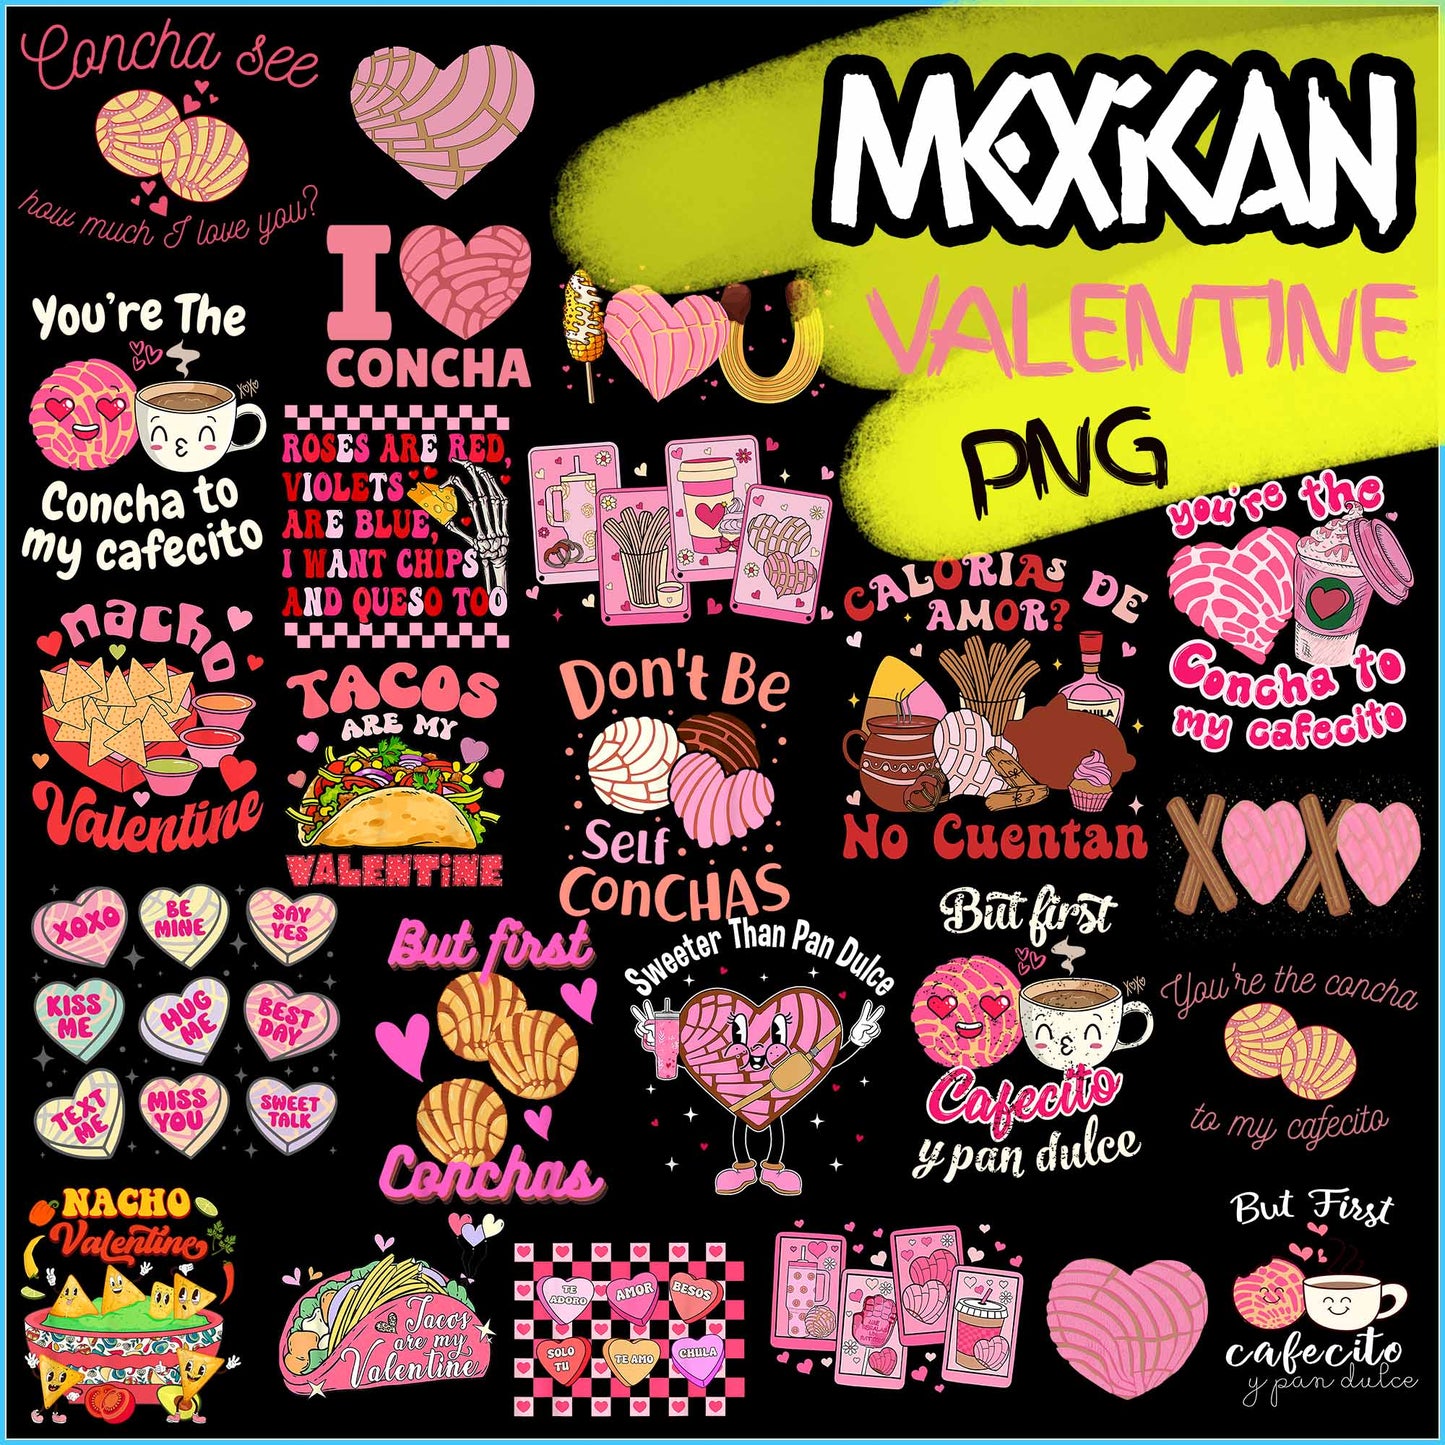 Mexican Valentine Png Bundle, Candy Valentines Png, Pan Ducle Valentine